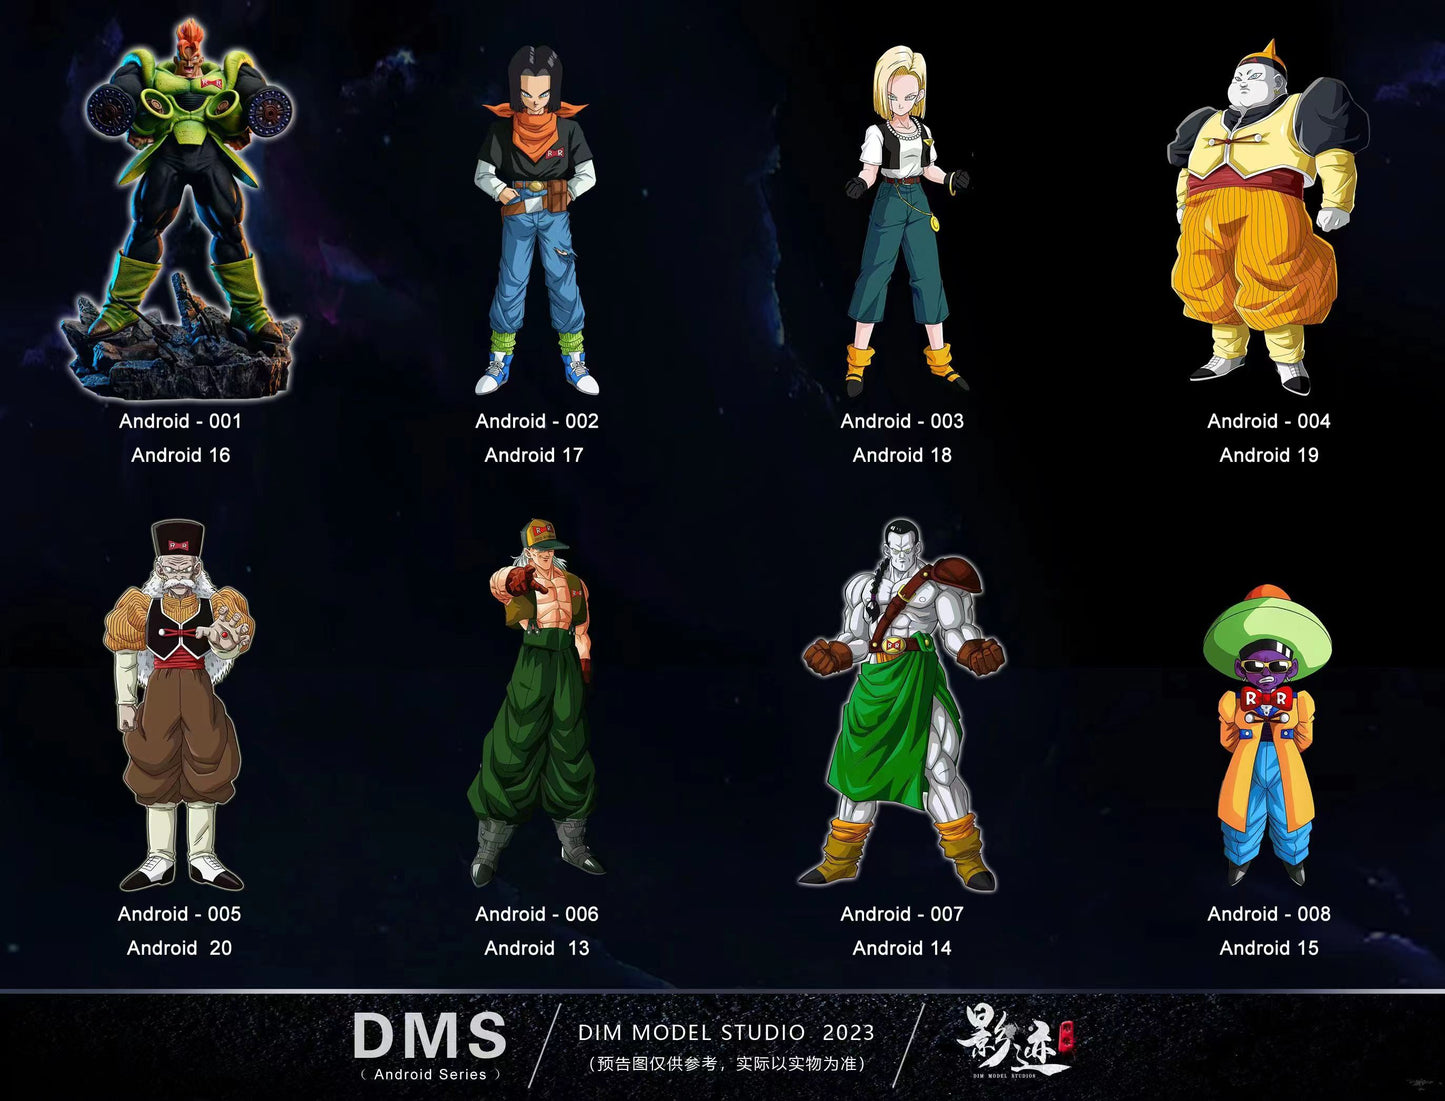 DIM MODEL STUDIO – DRAGON BALL Z: ANDROID SERIES 1. HELL’S FLASH ANDROID 16 [PRE-ORDER]